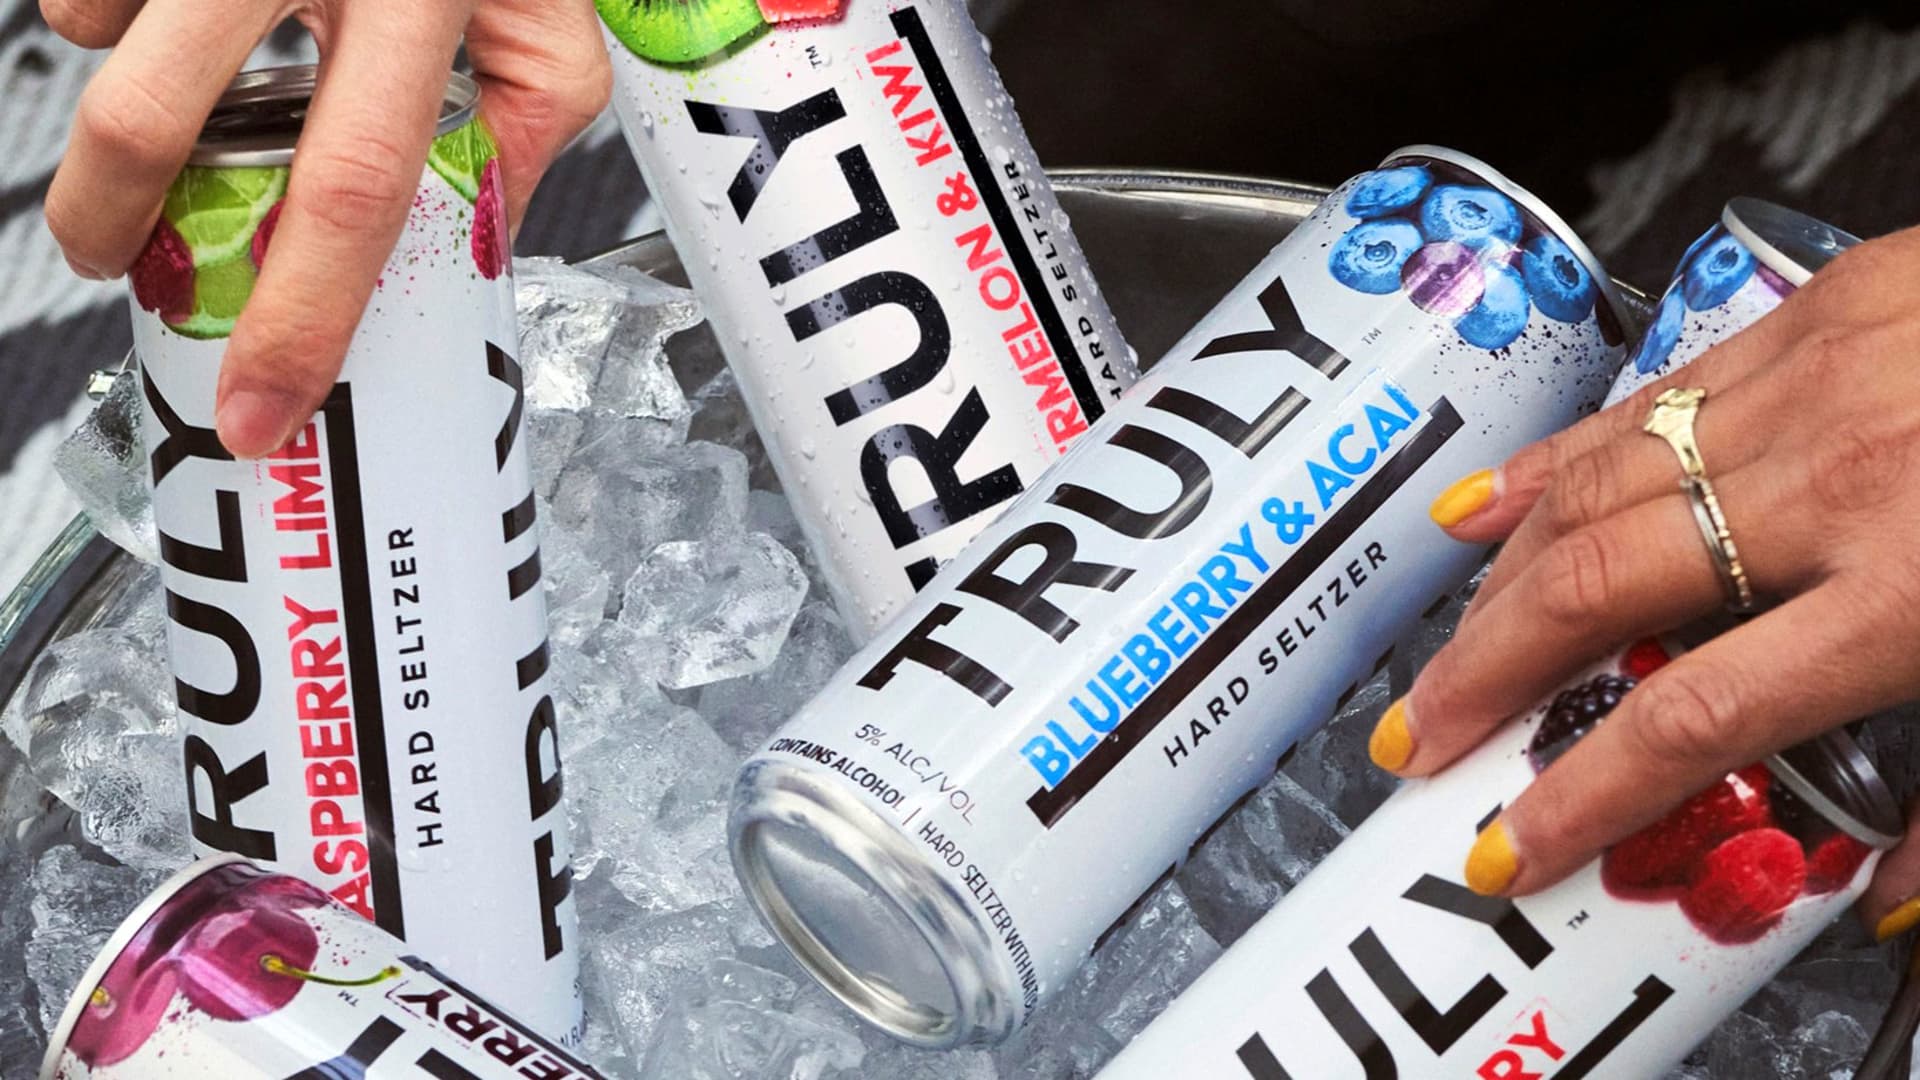 RBC downgrades Boston Beer, cuts price target on waning popularity of Truly hard seltzer